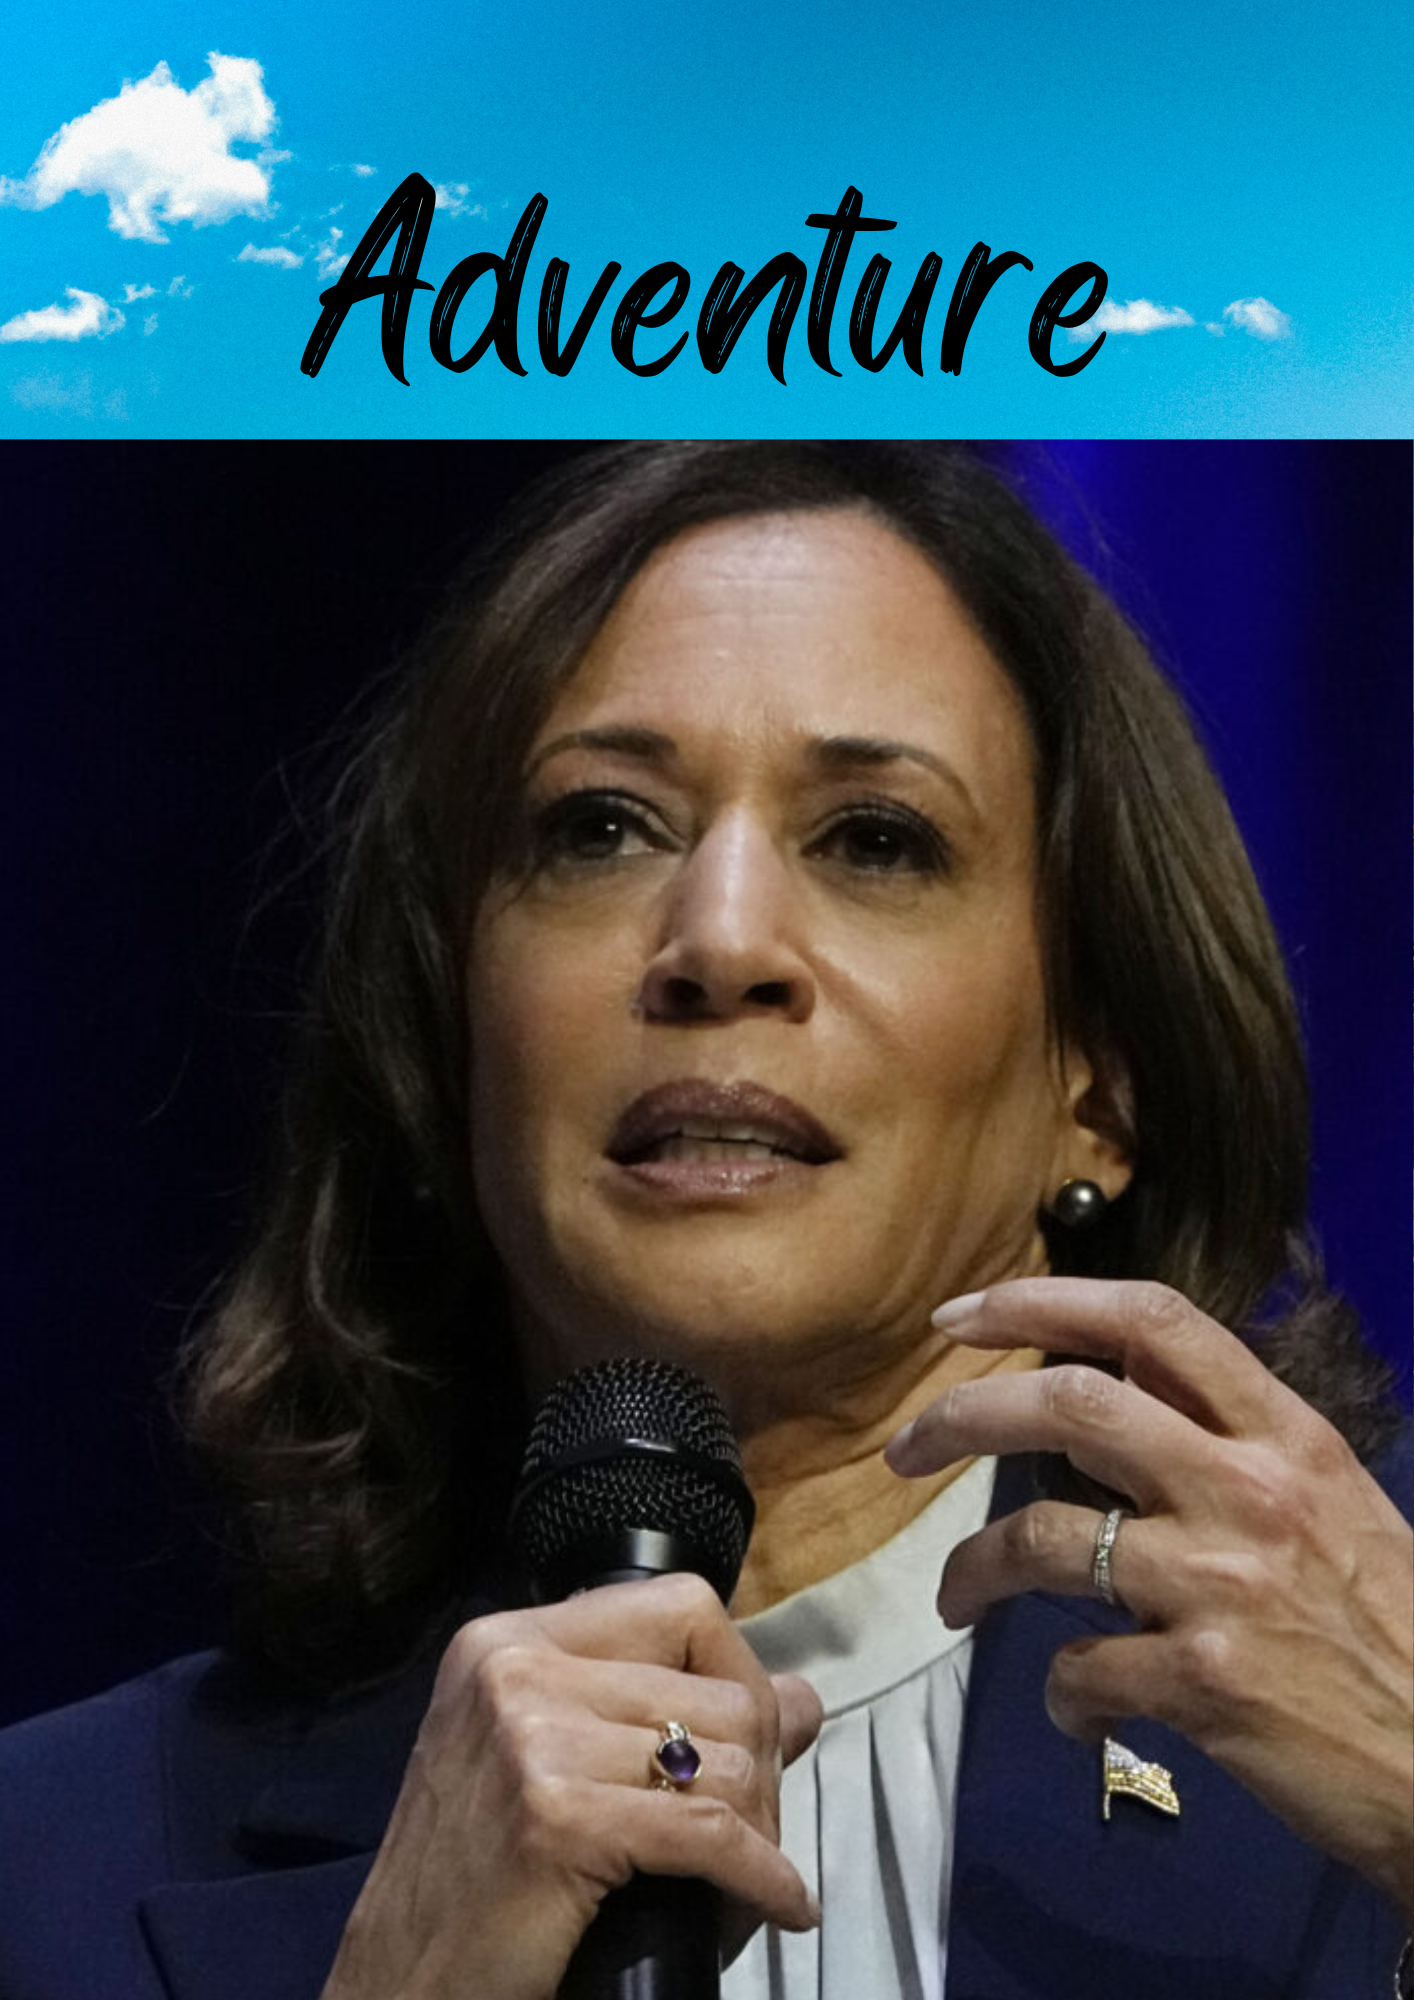 Vice President Kamala Harris has brought forward a thought-provoking proposal, suggesting that reducing the population could be a viable strategy in the fight against climate change